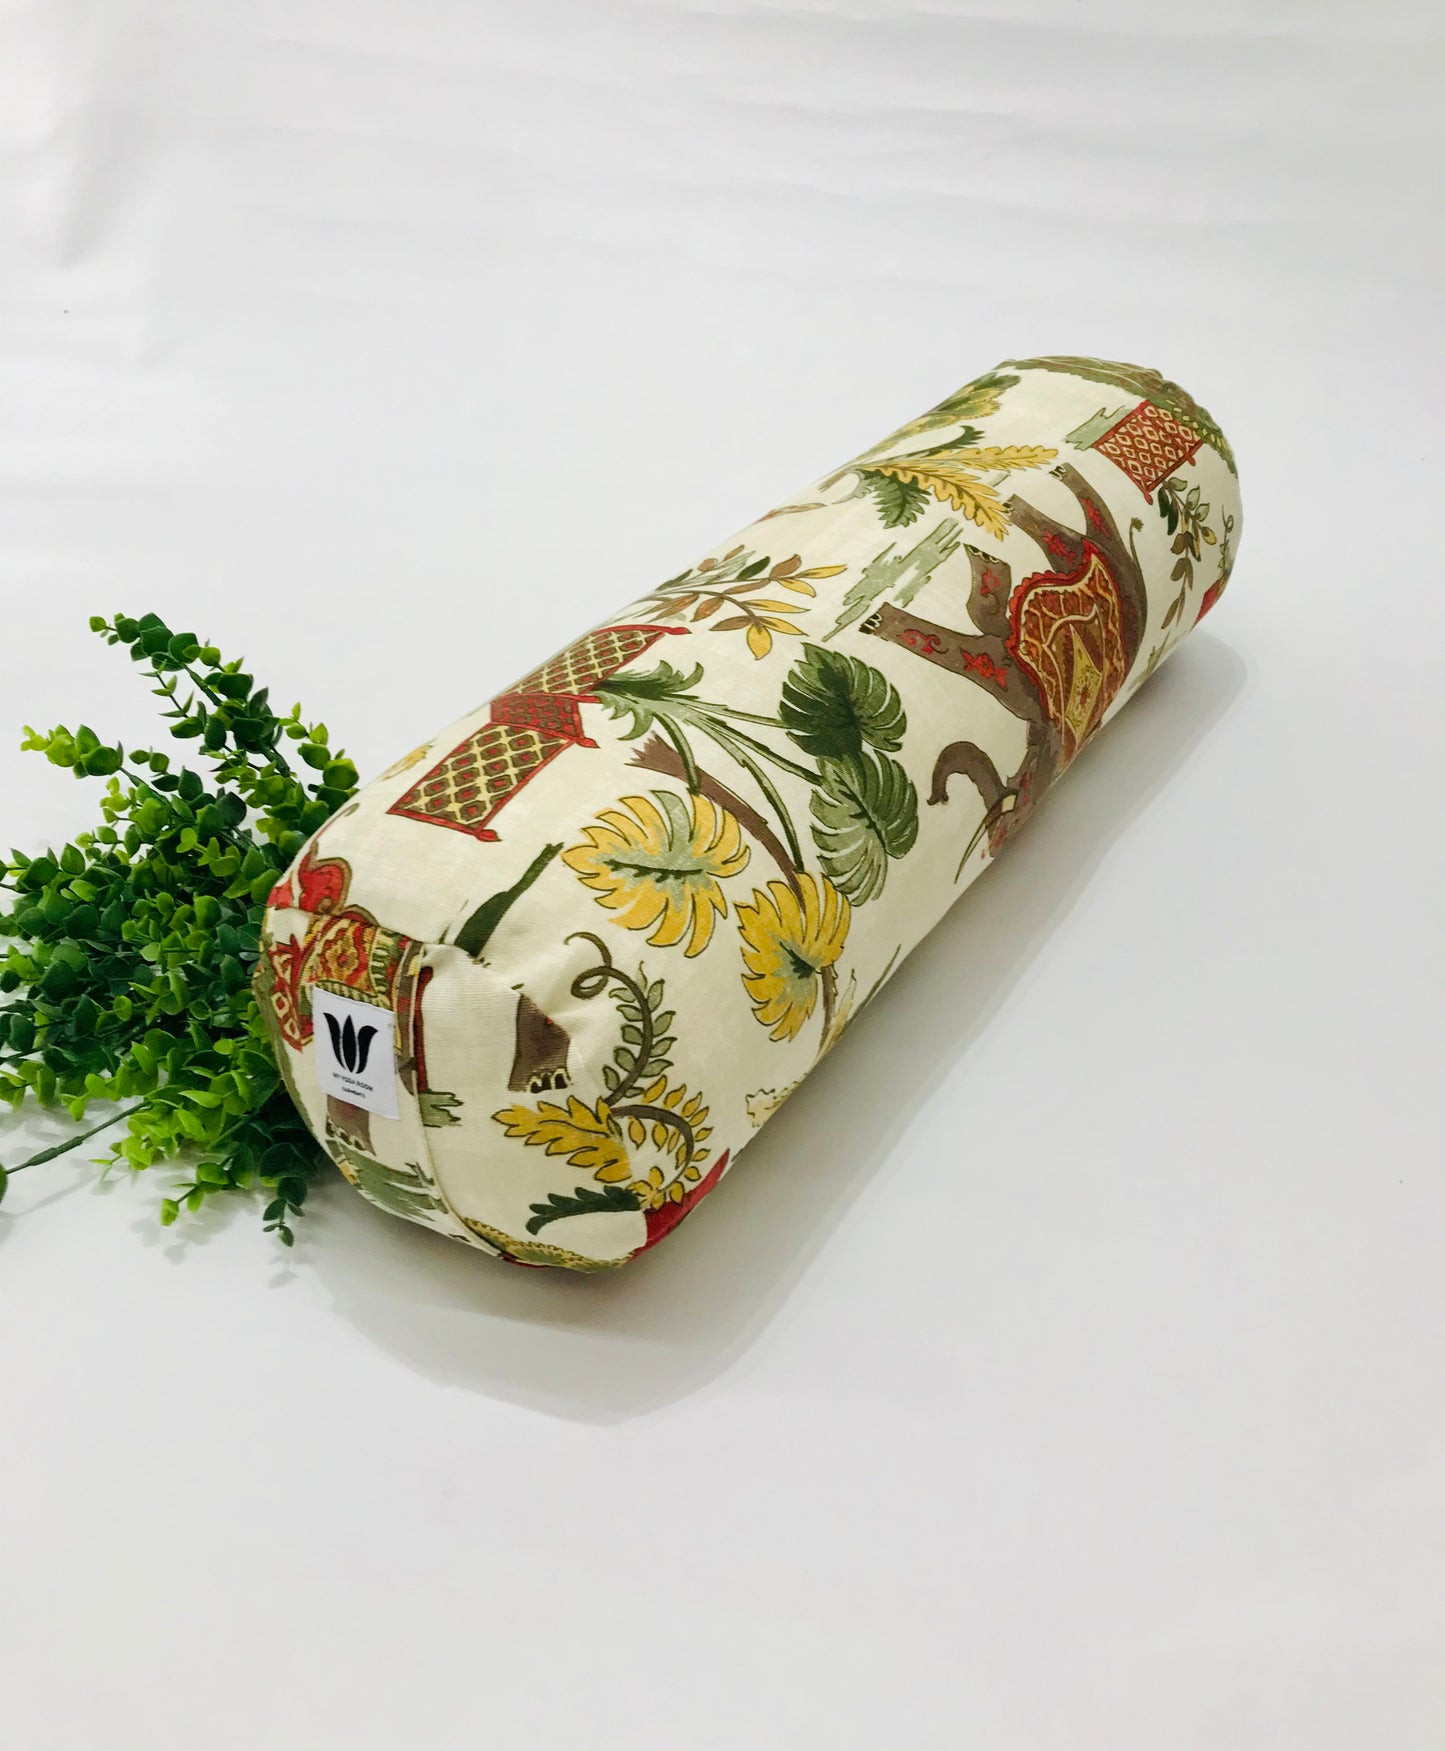 Round yoga bolster in cotton canvas, novelty fabric with India images fabric. Allergy conscious fill with removeable cover. Made in Canada by My Yoga Room Elements